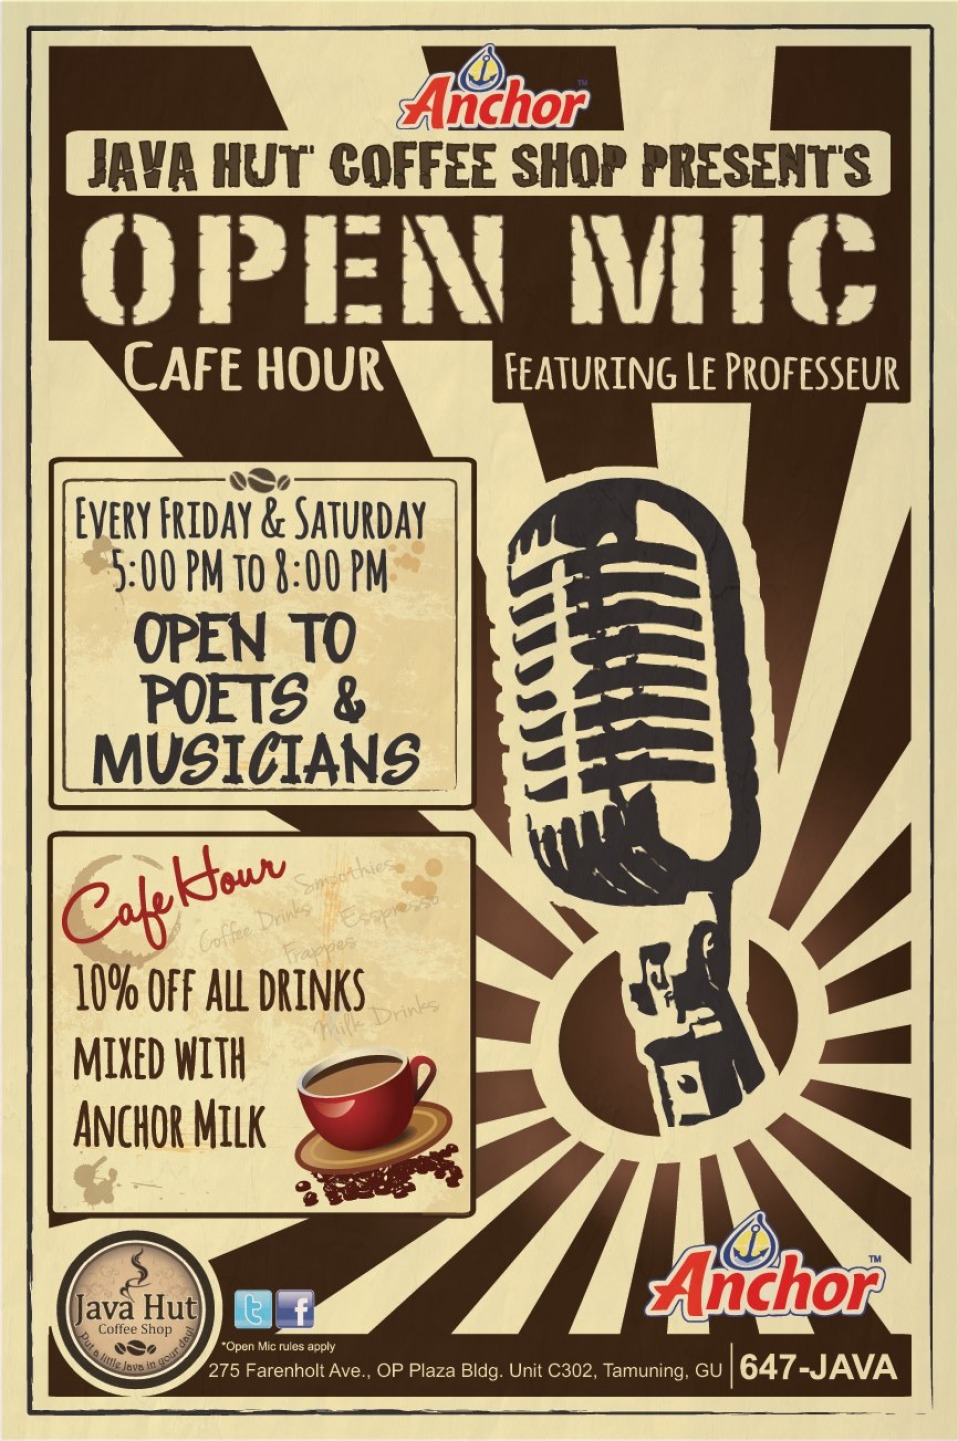 Open Mic at Java Hut for the Creative Poets, Singers, Musicians, Speakers, Comedians on Guam